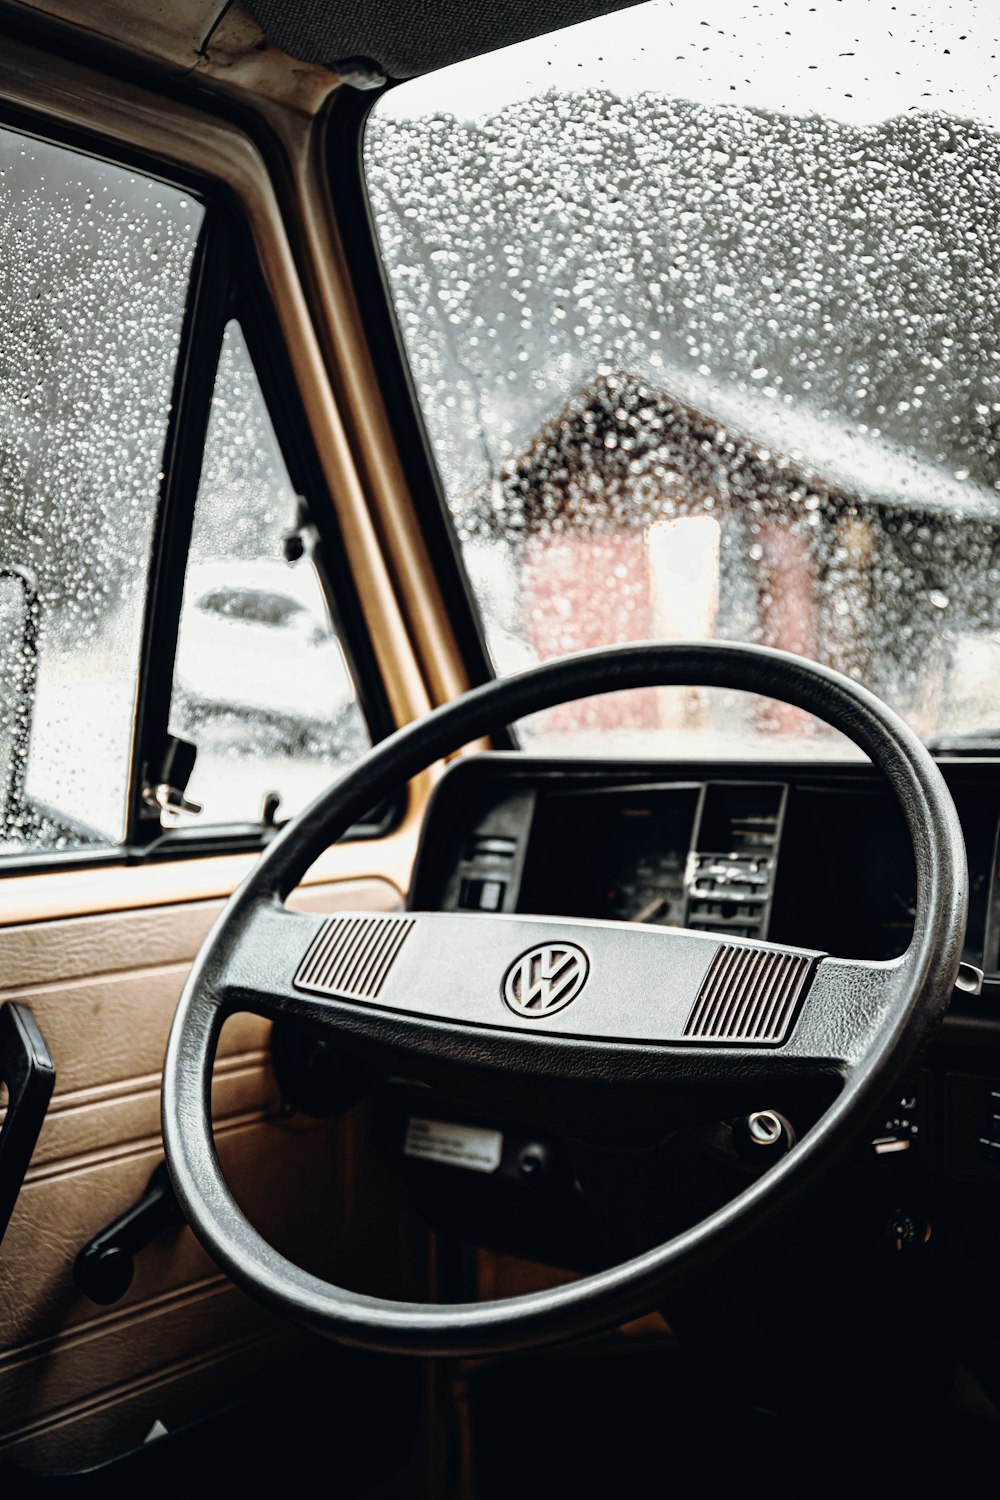 a steering wheel and dashboard of a vehicle on a rainy day